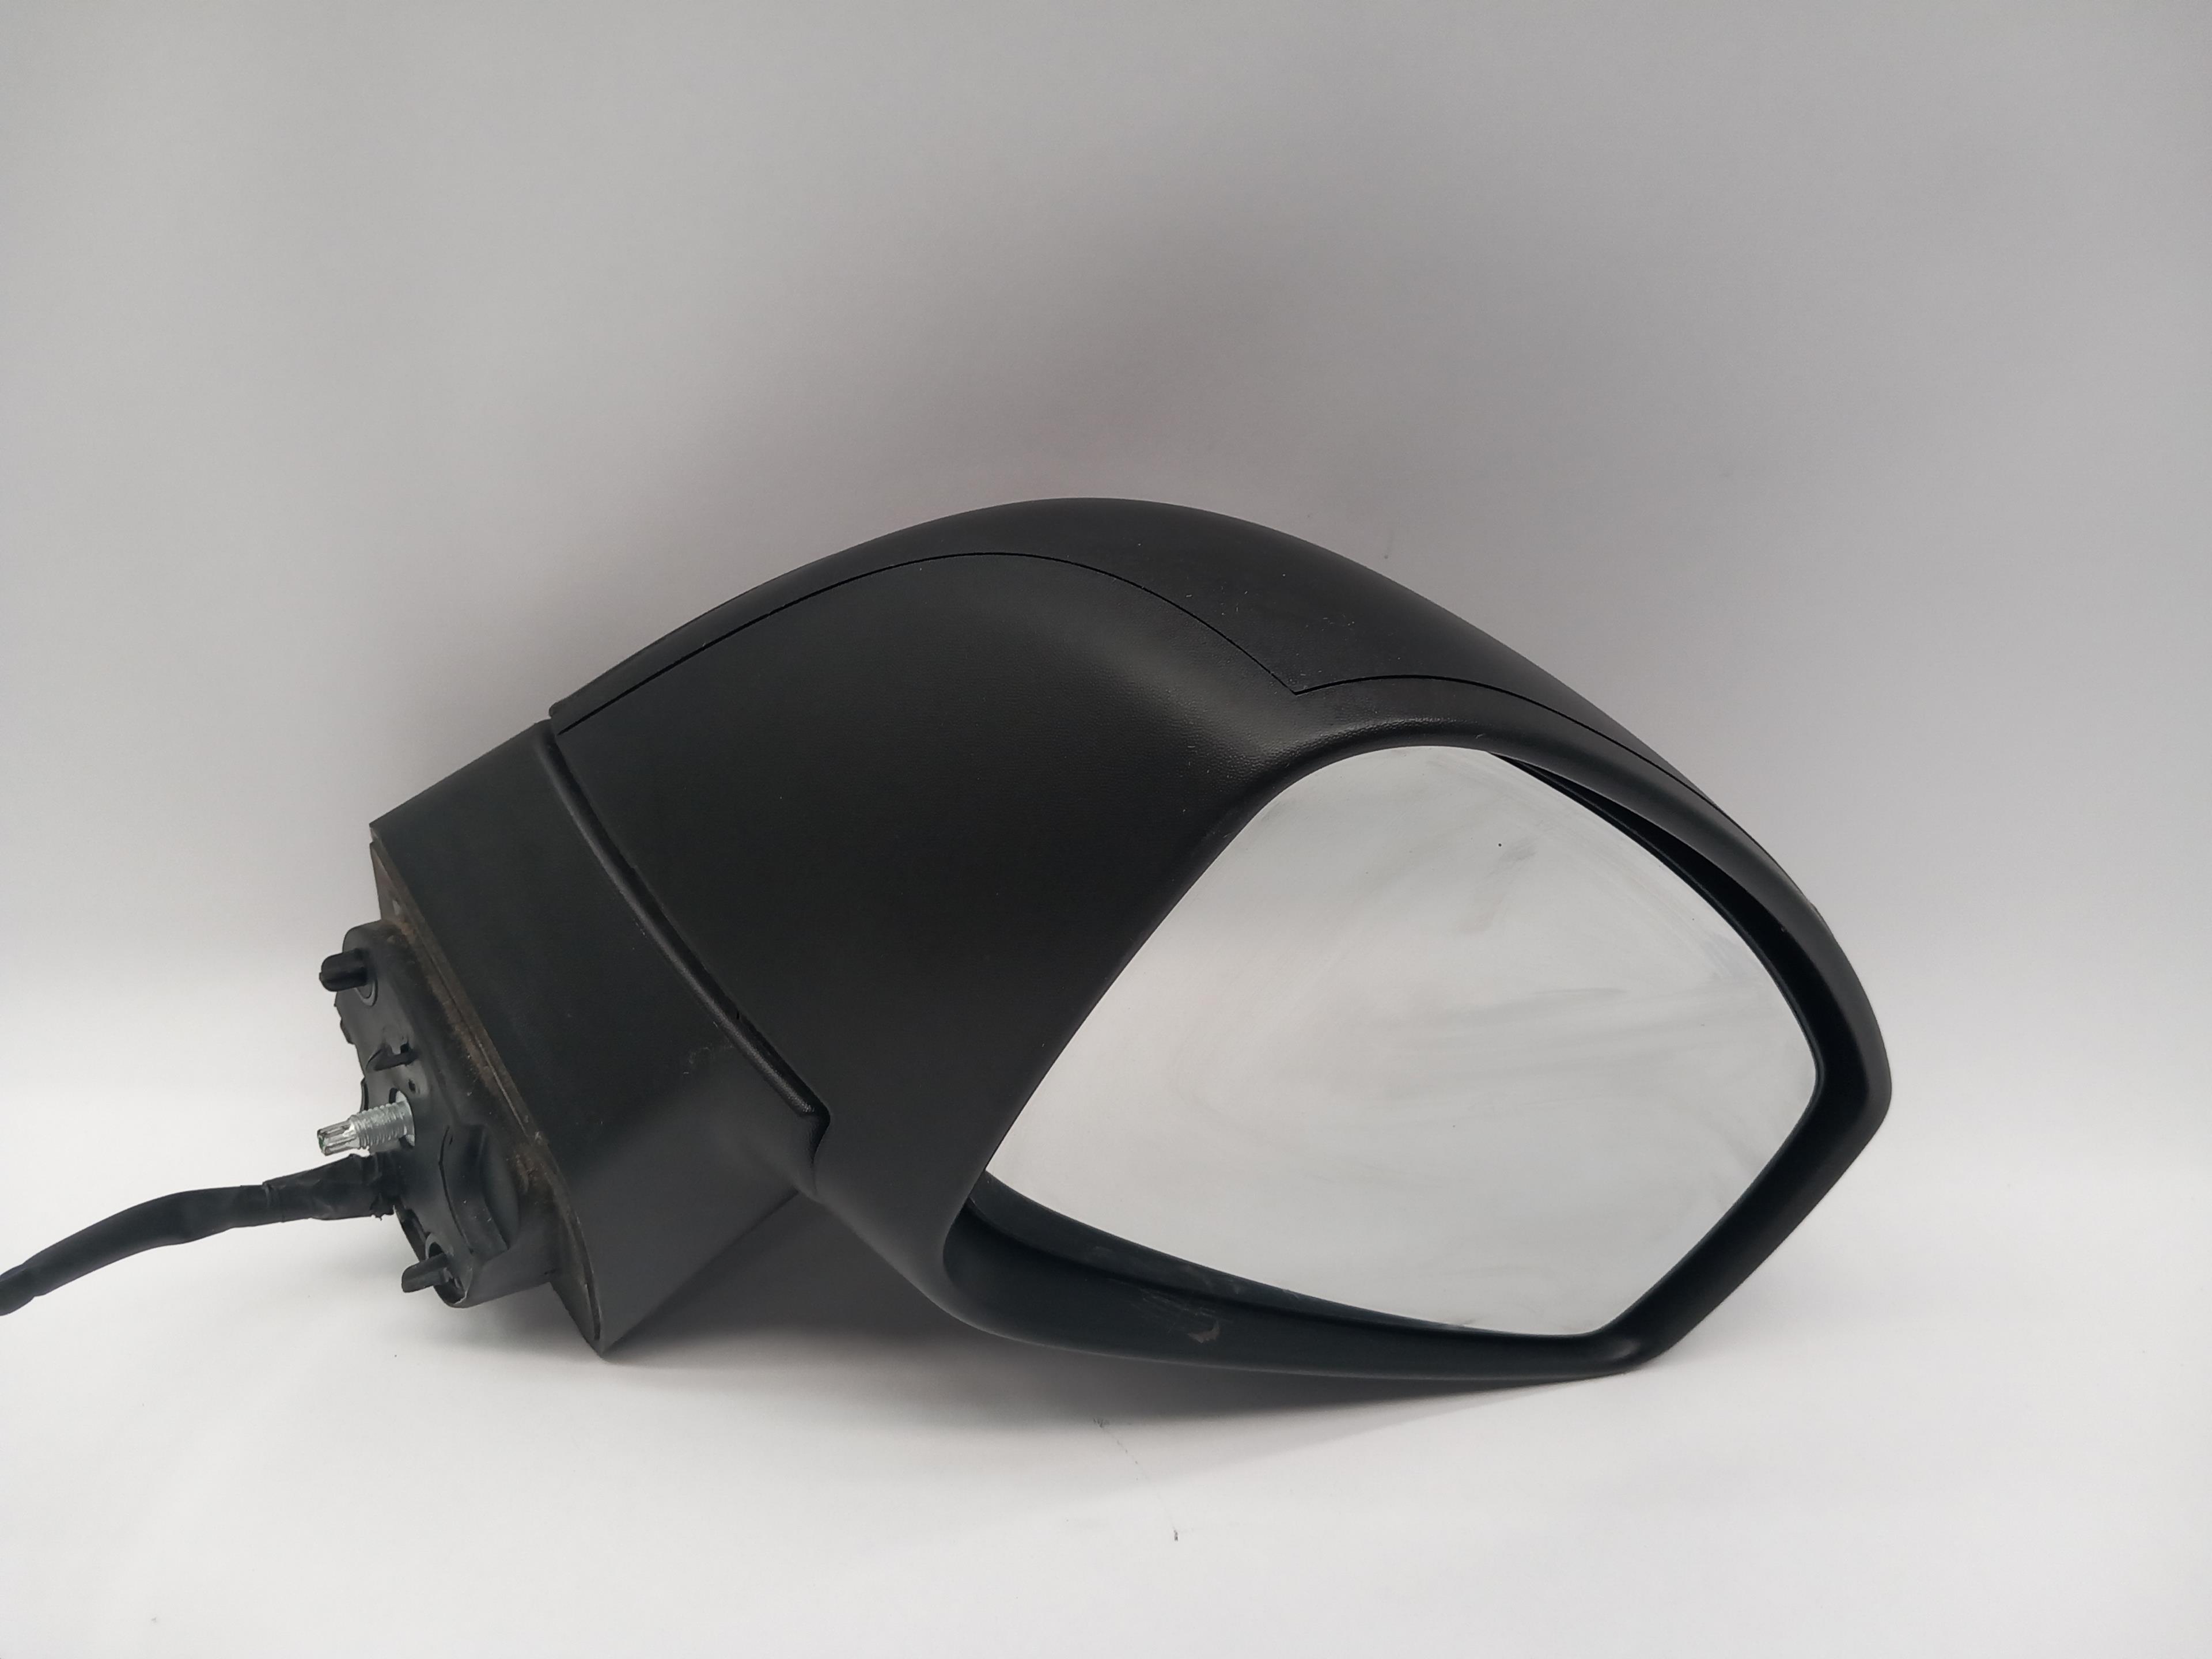 RENAULT Scenic 3 generation (2009-2015) Right Side Wing Mirror 963019850R 25268023